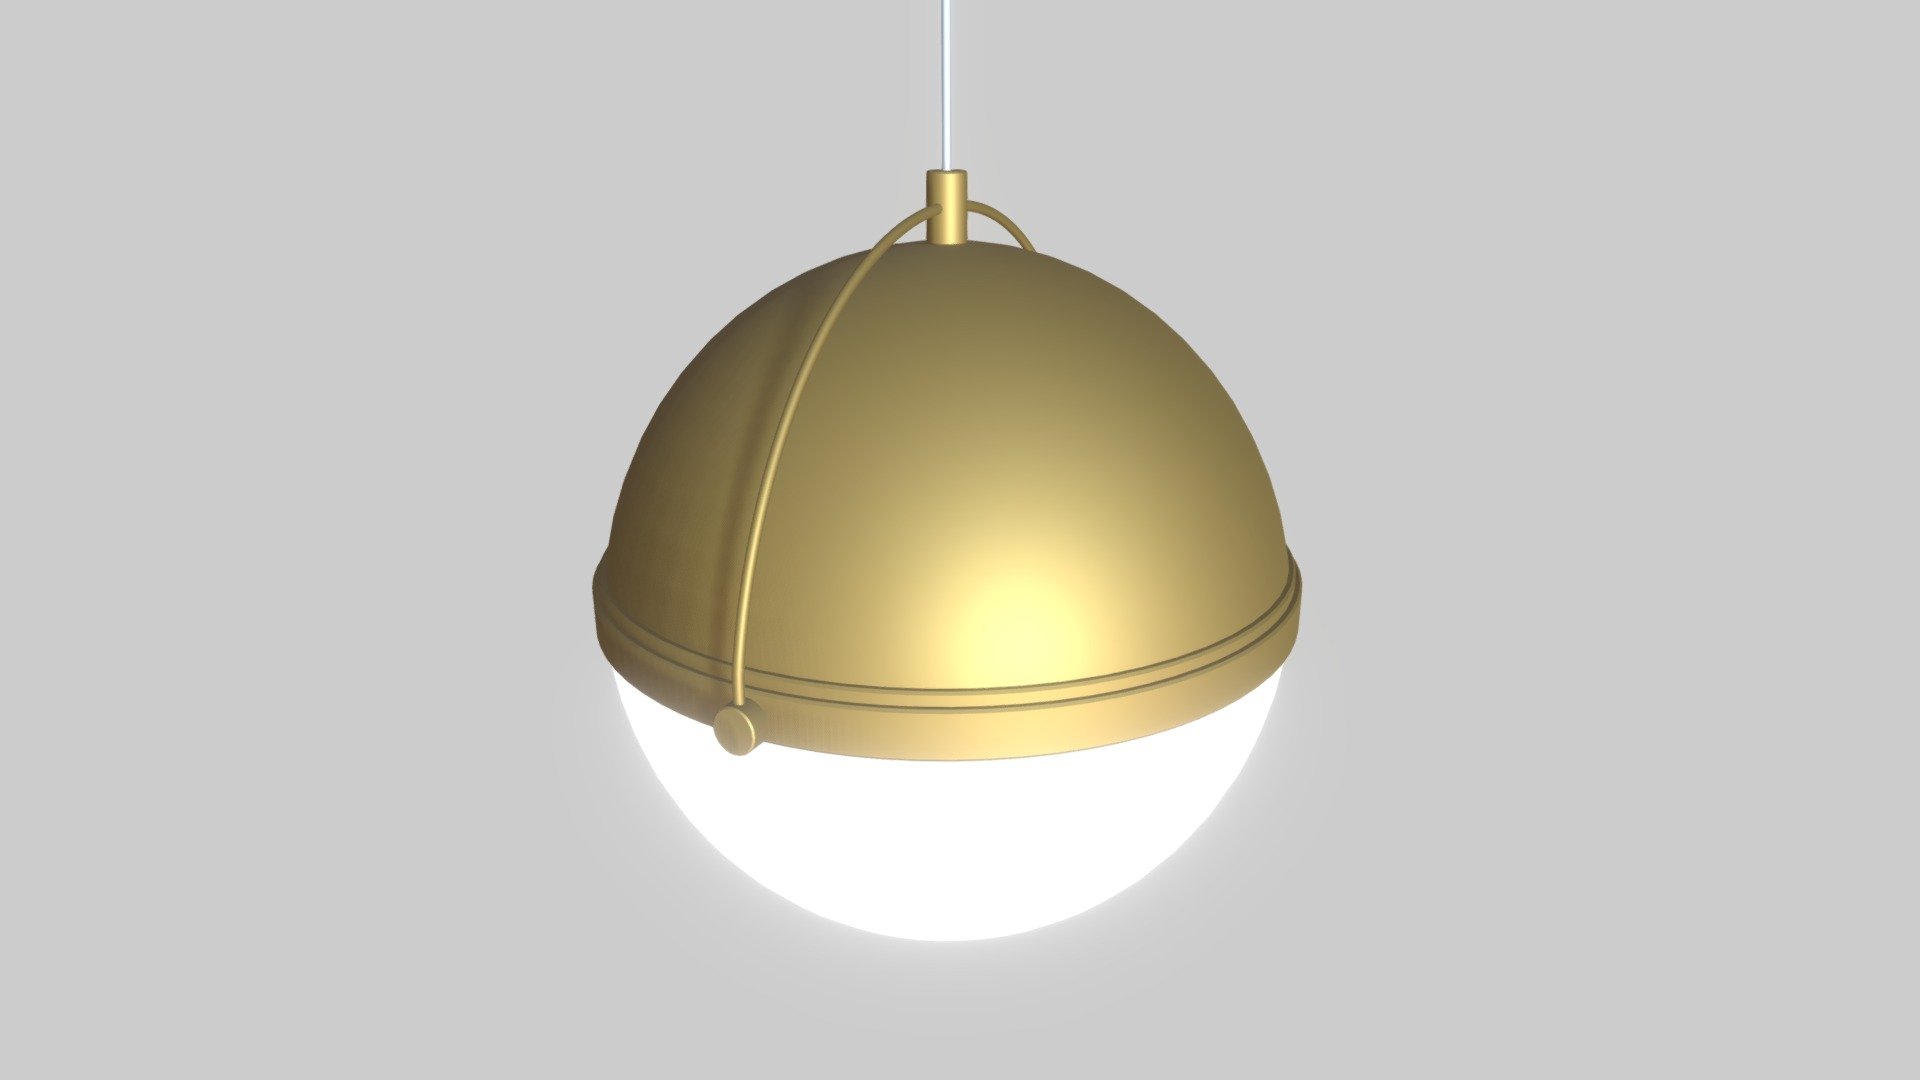 3D model of the Brass Sphere Lamp Pendant Light
Formats for download:
FBX, .max2015, .max 2018
Includes 4 product renders - Brass Sphere Lamp - Buy Royalty Free 3D model by Gov3dstudio 3d model